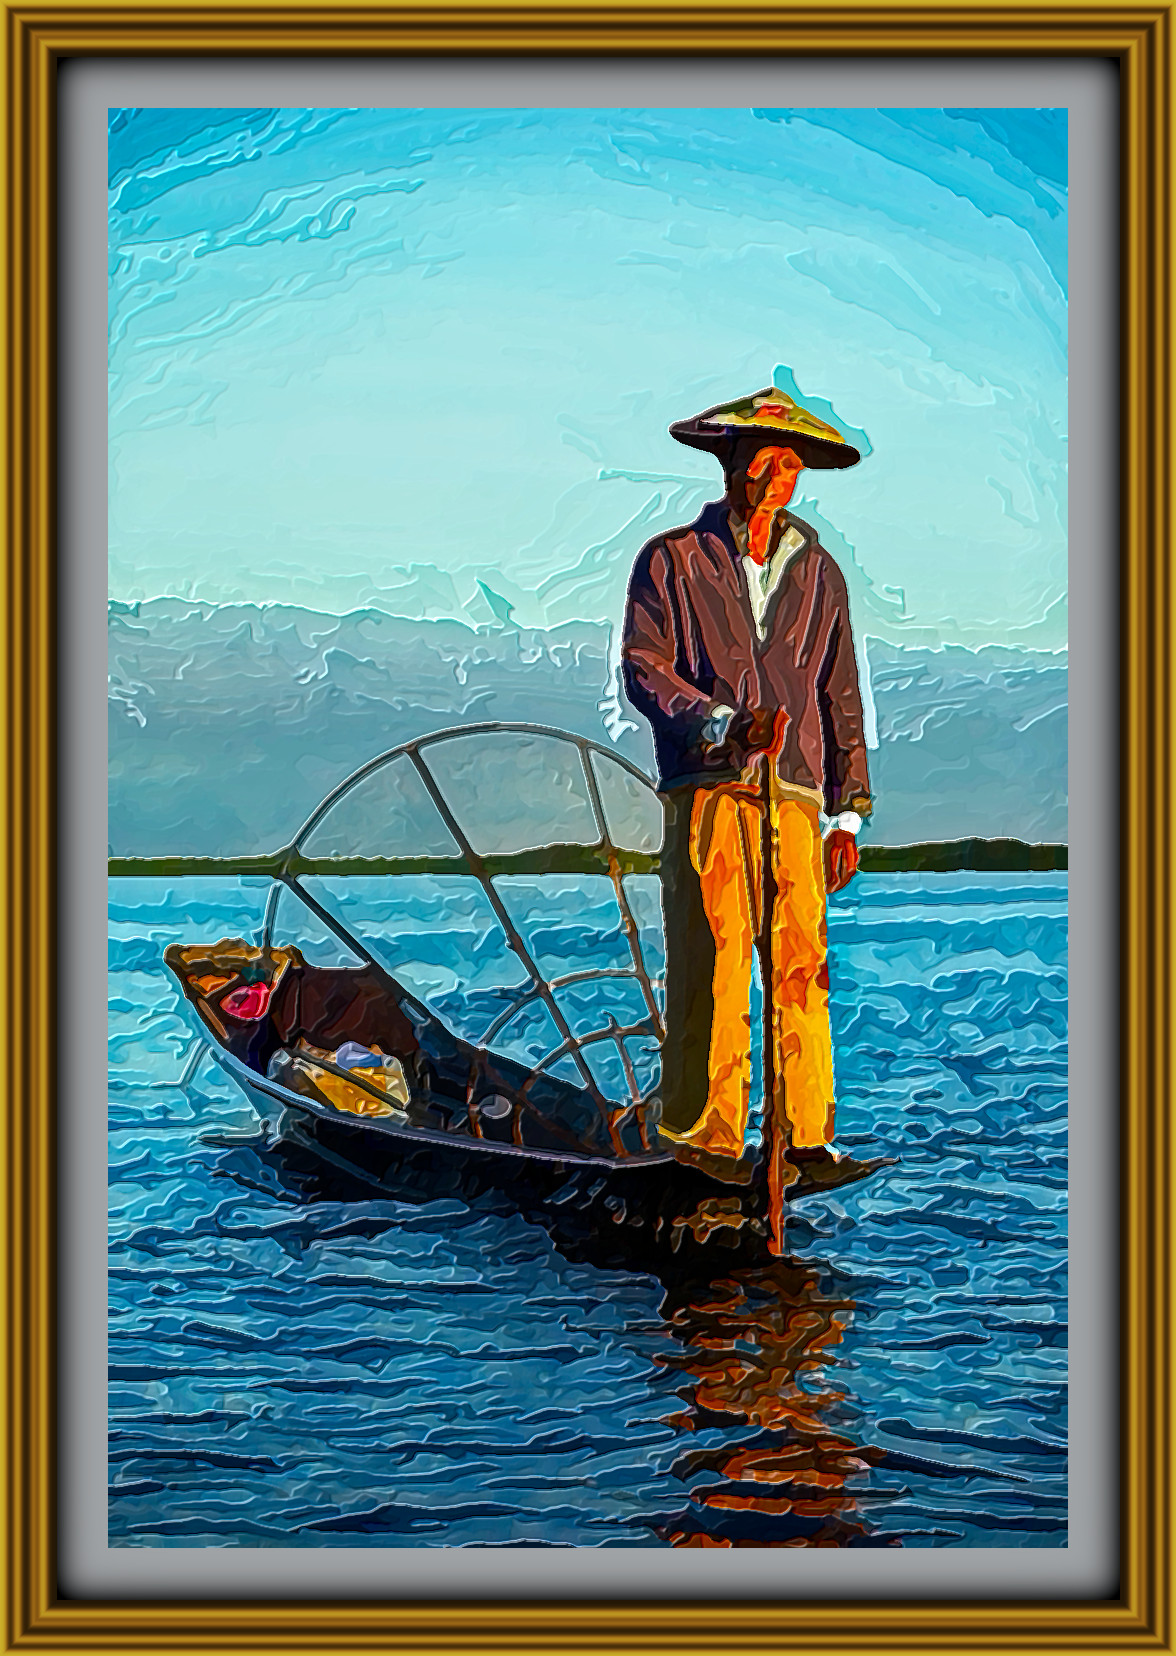 2024-02-15 09-48-09 Inle_Lake_Fisherman_Myanmar_Colby_Brown with JVID Embossed Graphic Effect, parms=1, 127.0, 6.0, 8.0, 7.5, 9.75, 1.5, 0.0, 0.jpeg